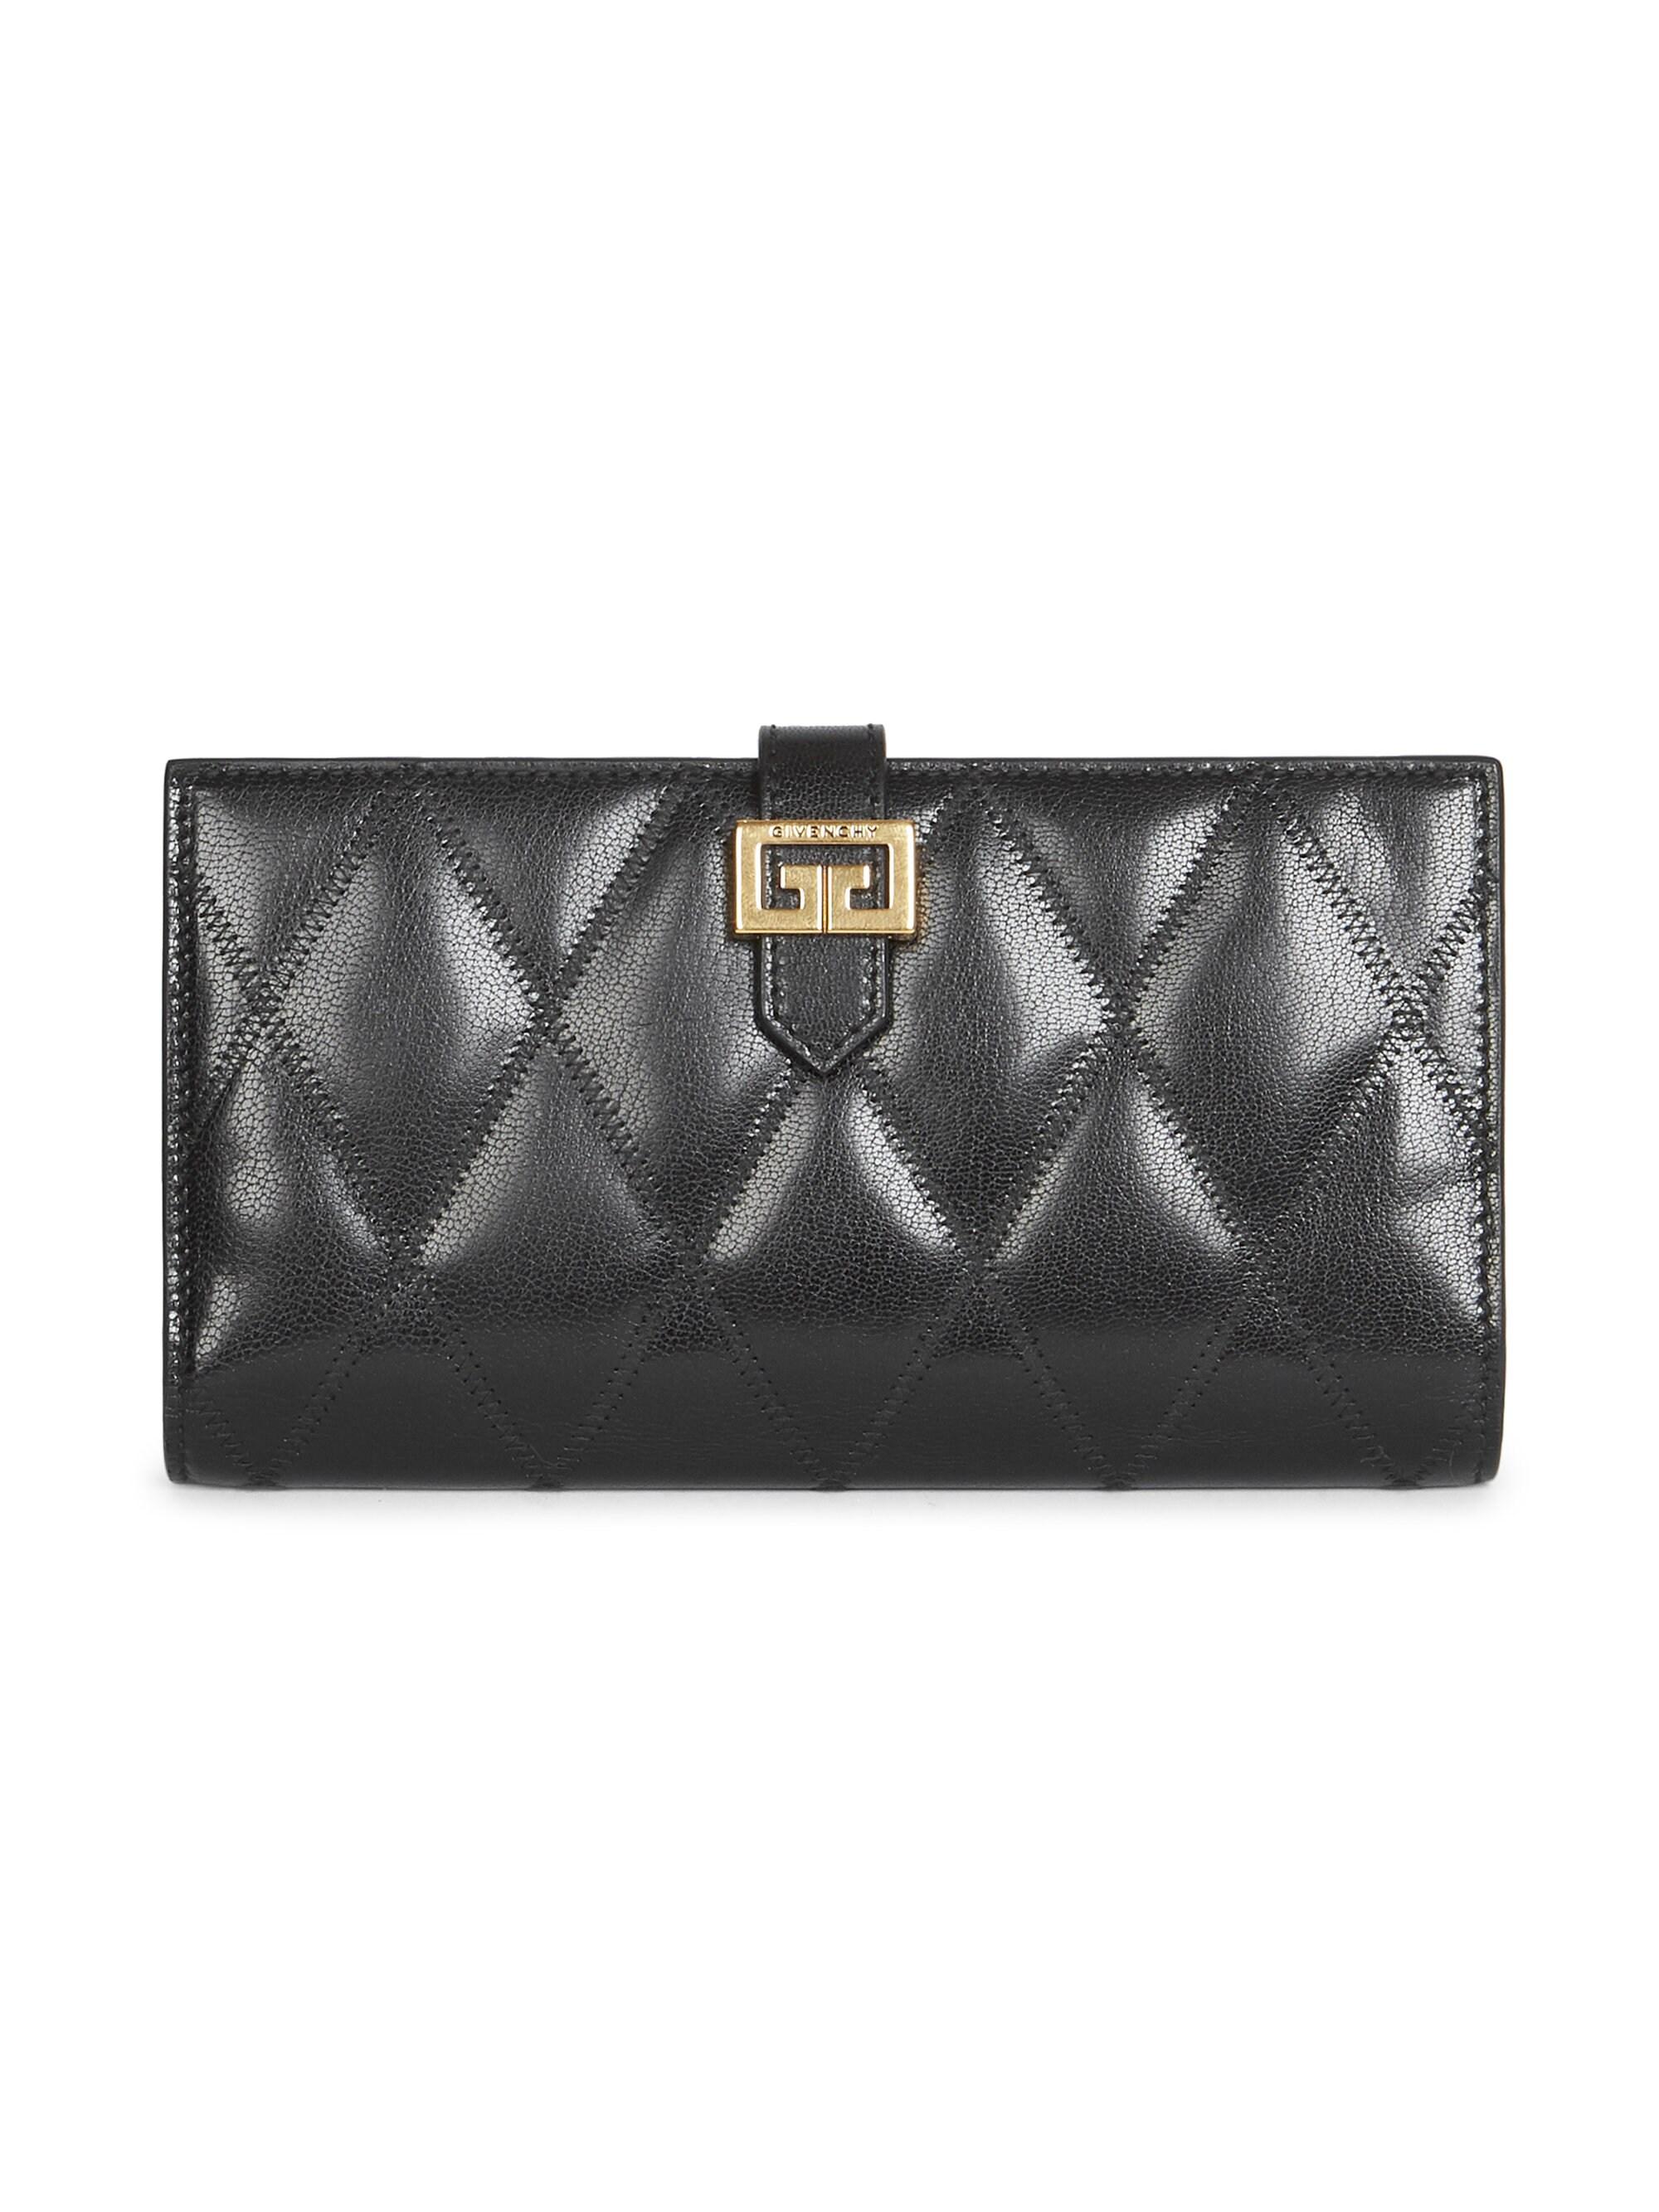 Givenchy Women's Gv3 Quilted Leather Wallet - Black in Black - Lyst